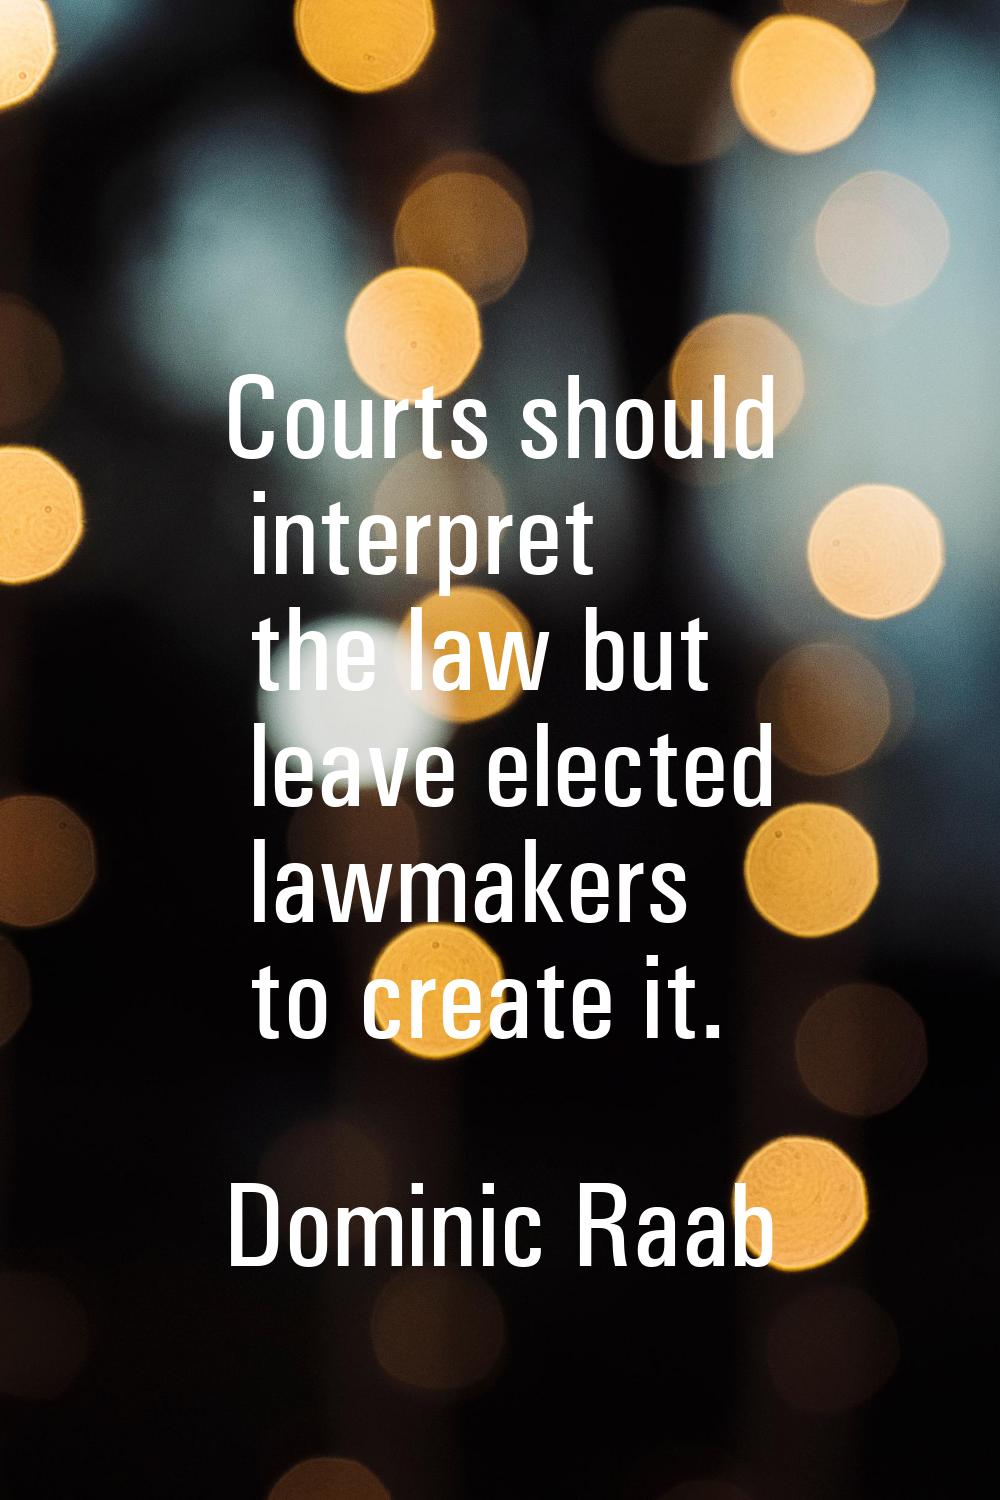 Courts should interpret the law but leave elected lawmakers to create it.